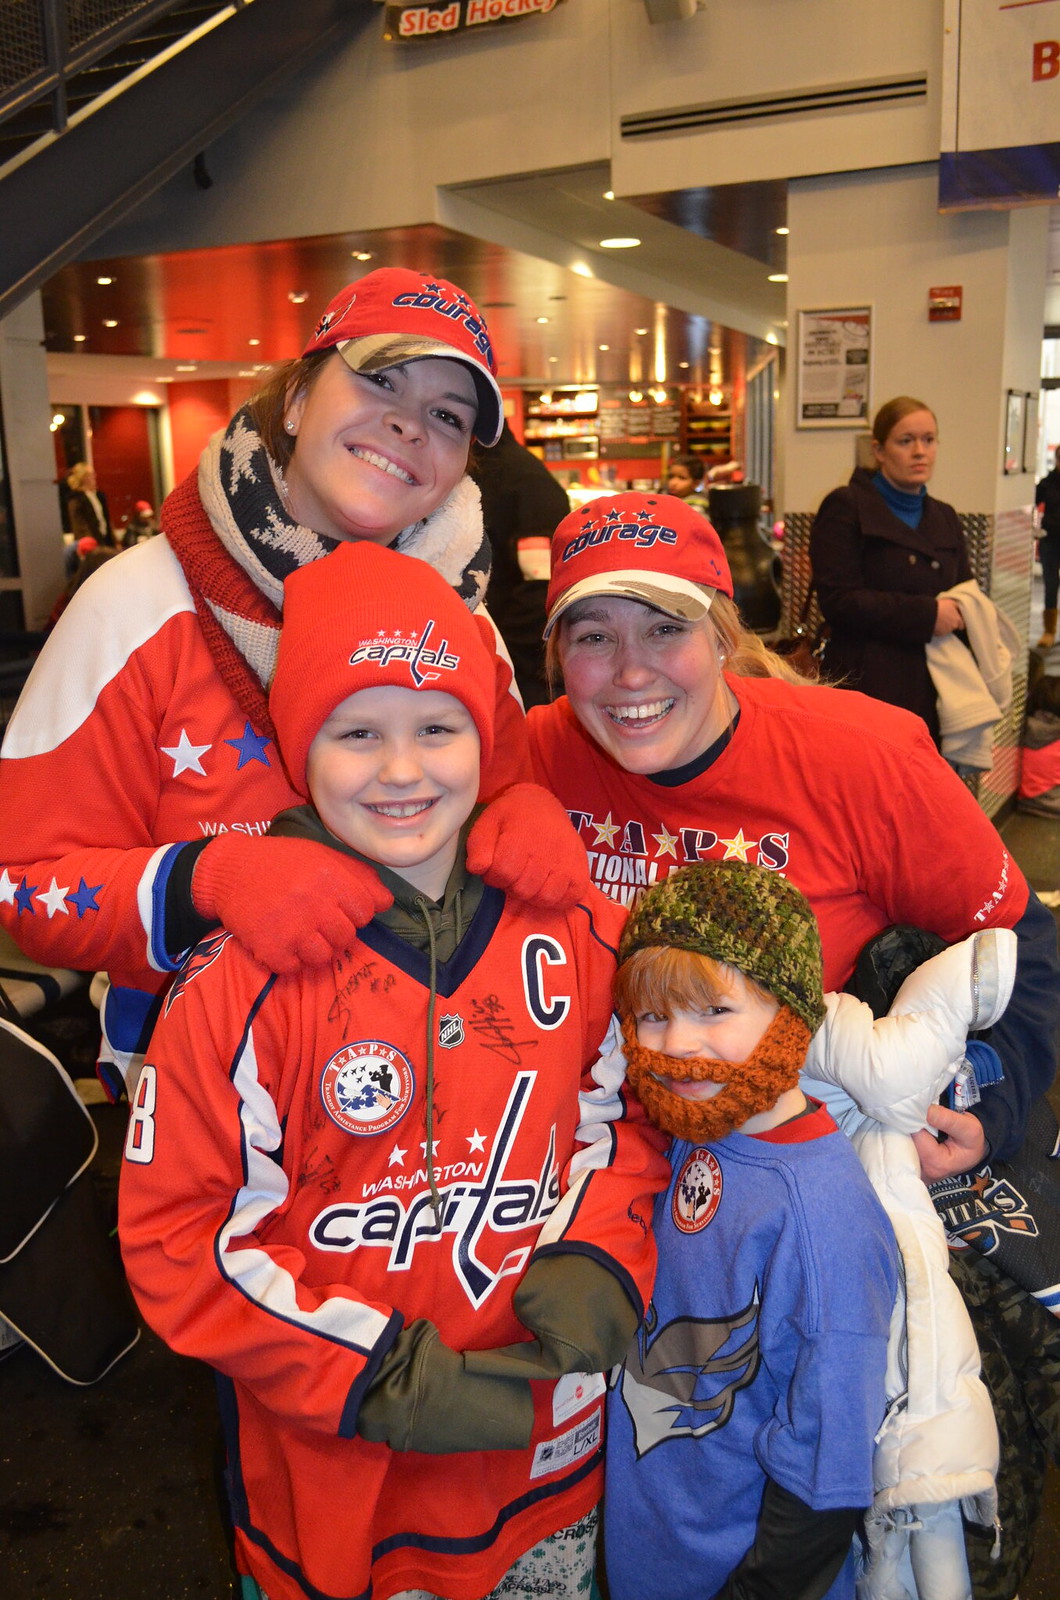 2016_T4T_Skate with Washington Capitals 10